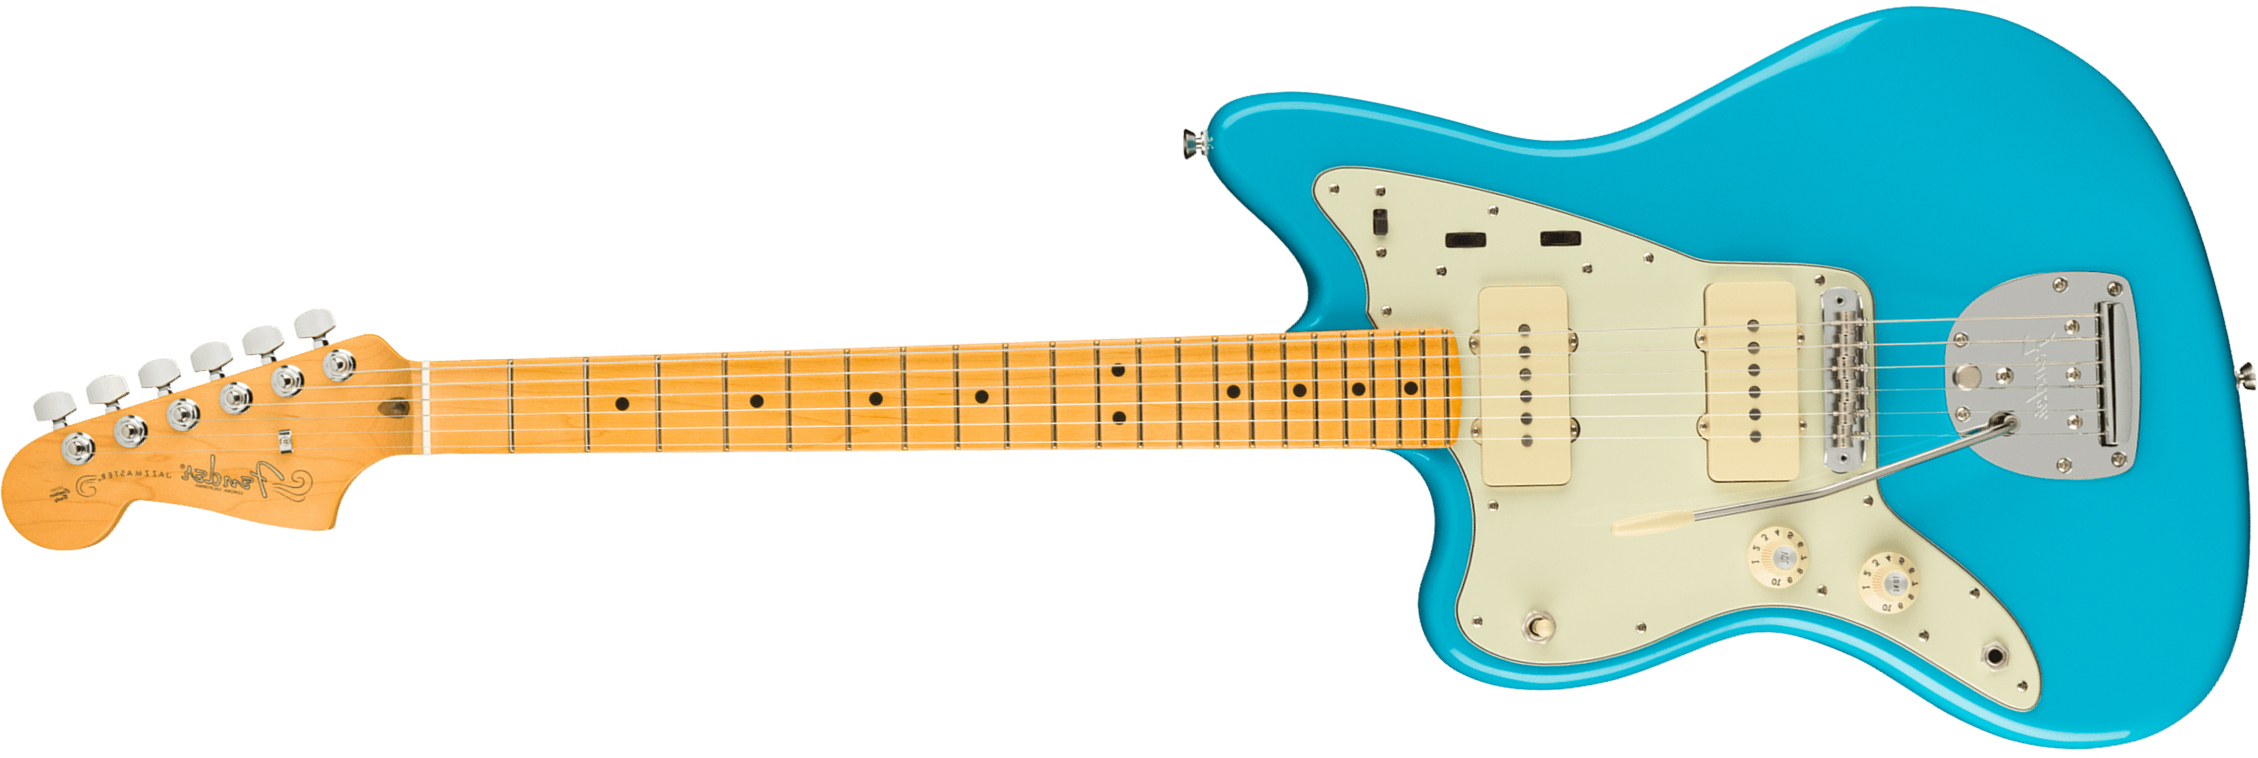 Fender Jazzmaster American Professional Ii Lh Gaucher Usa Mn - Miami Blue - Left-handed electric guitar - Main picture